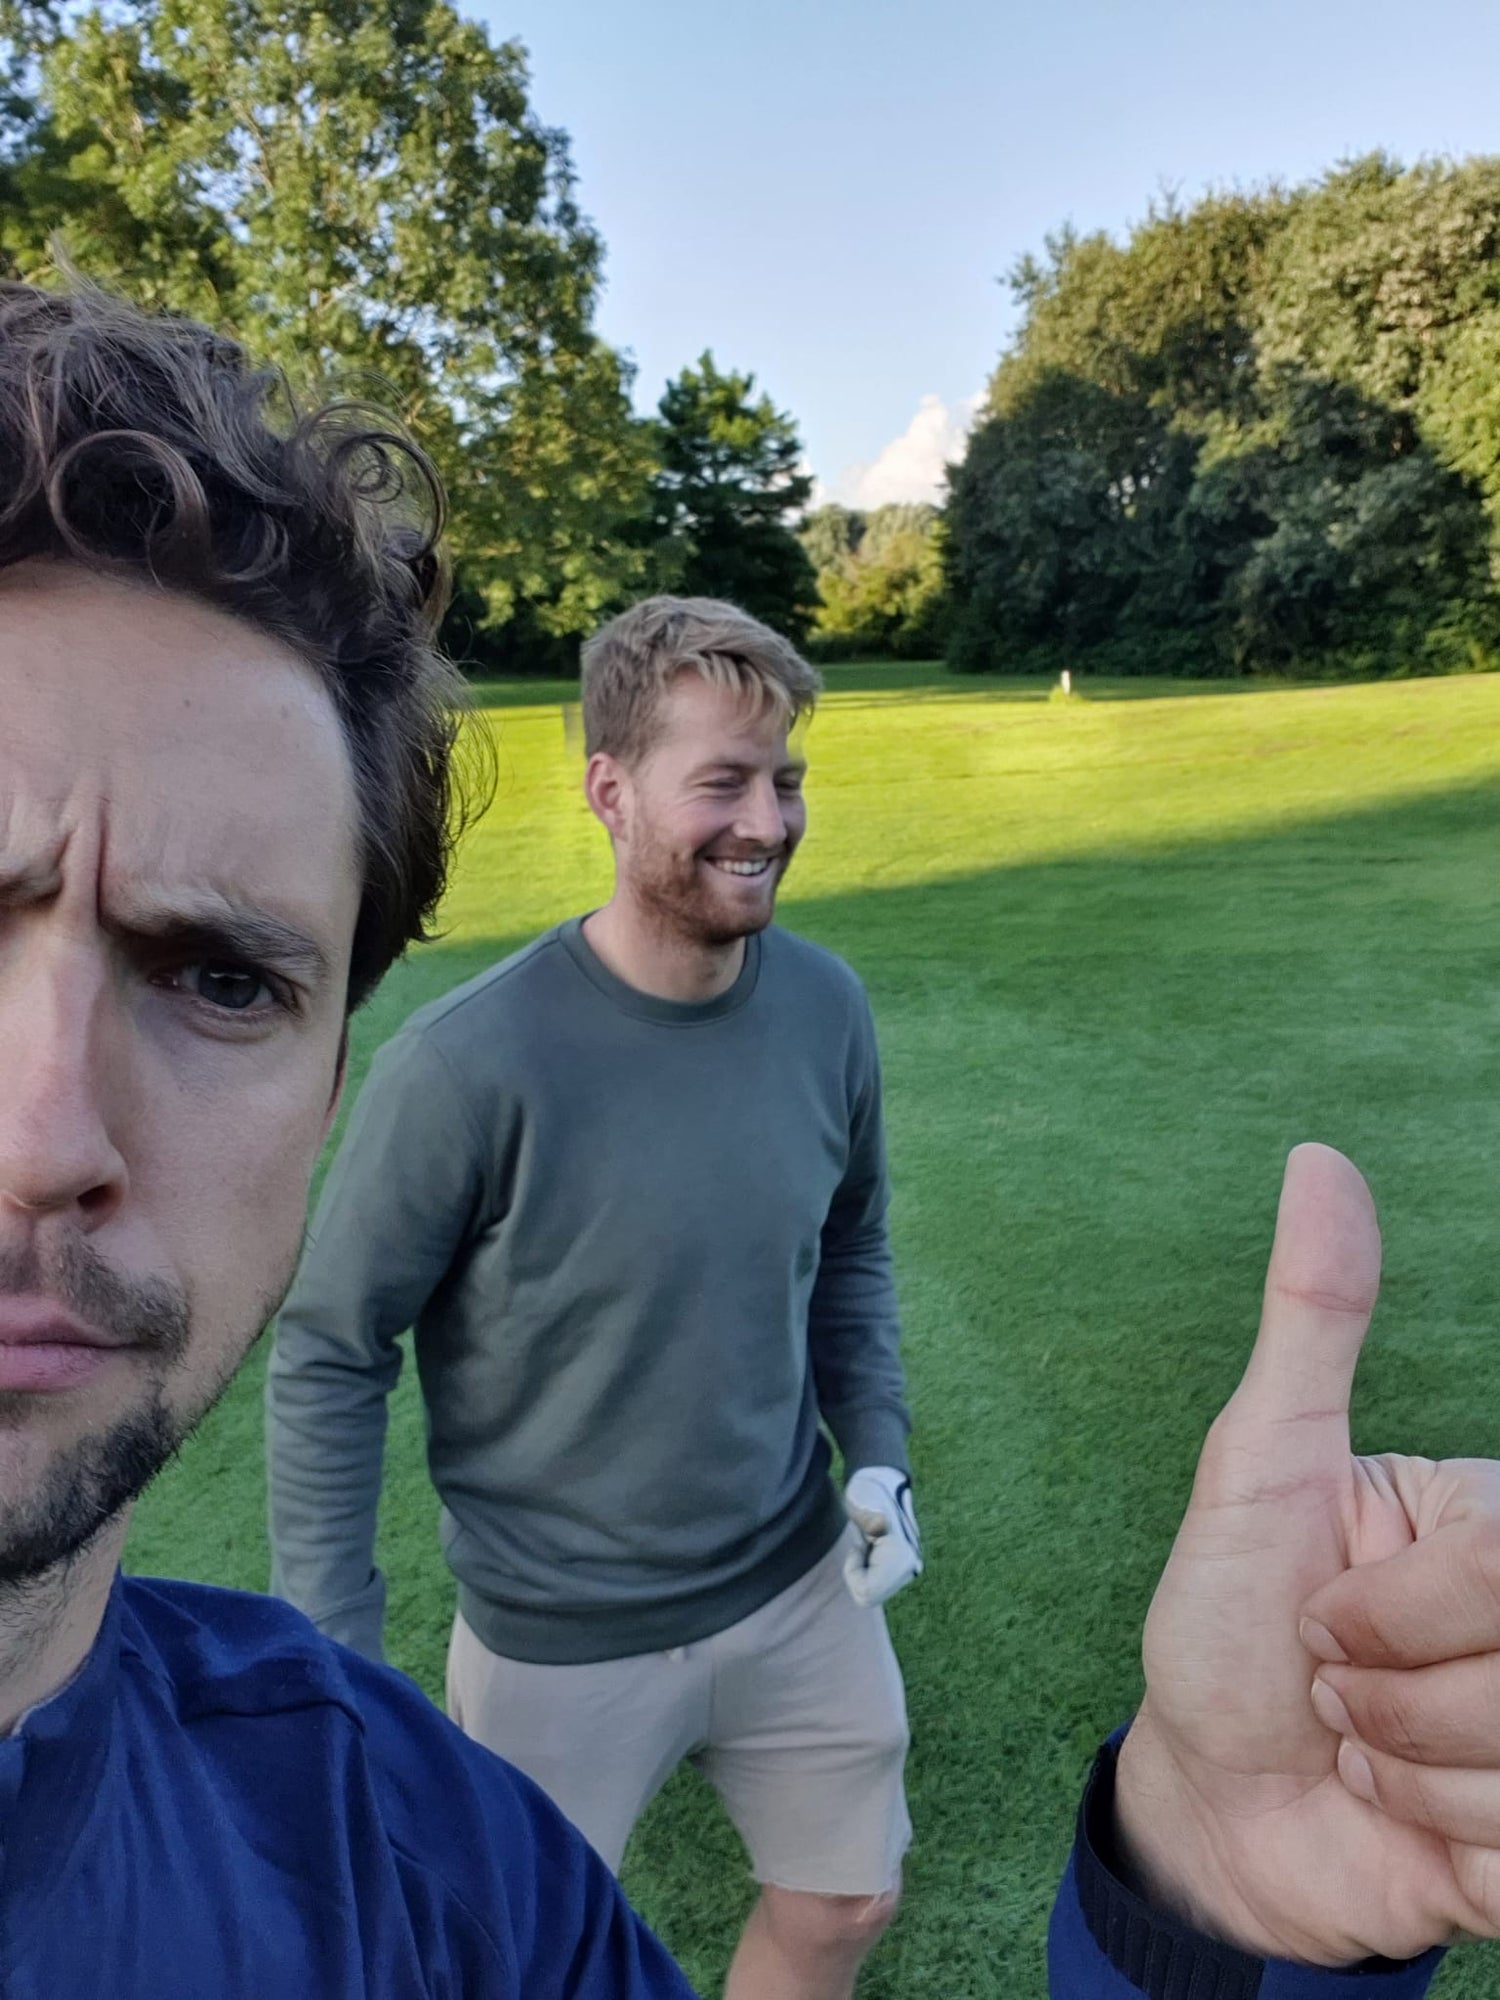 Founders of nineoutninein Thijs and Dino playing golf in their new apparel